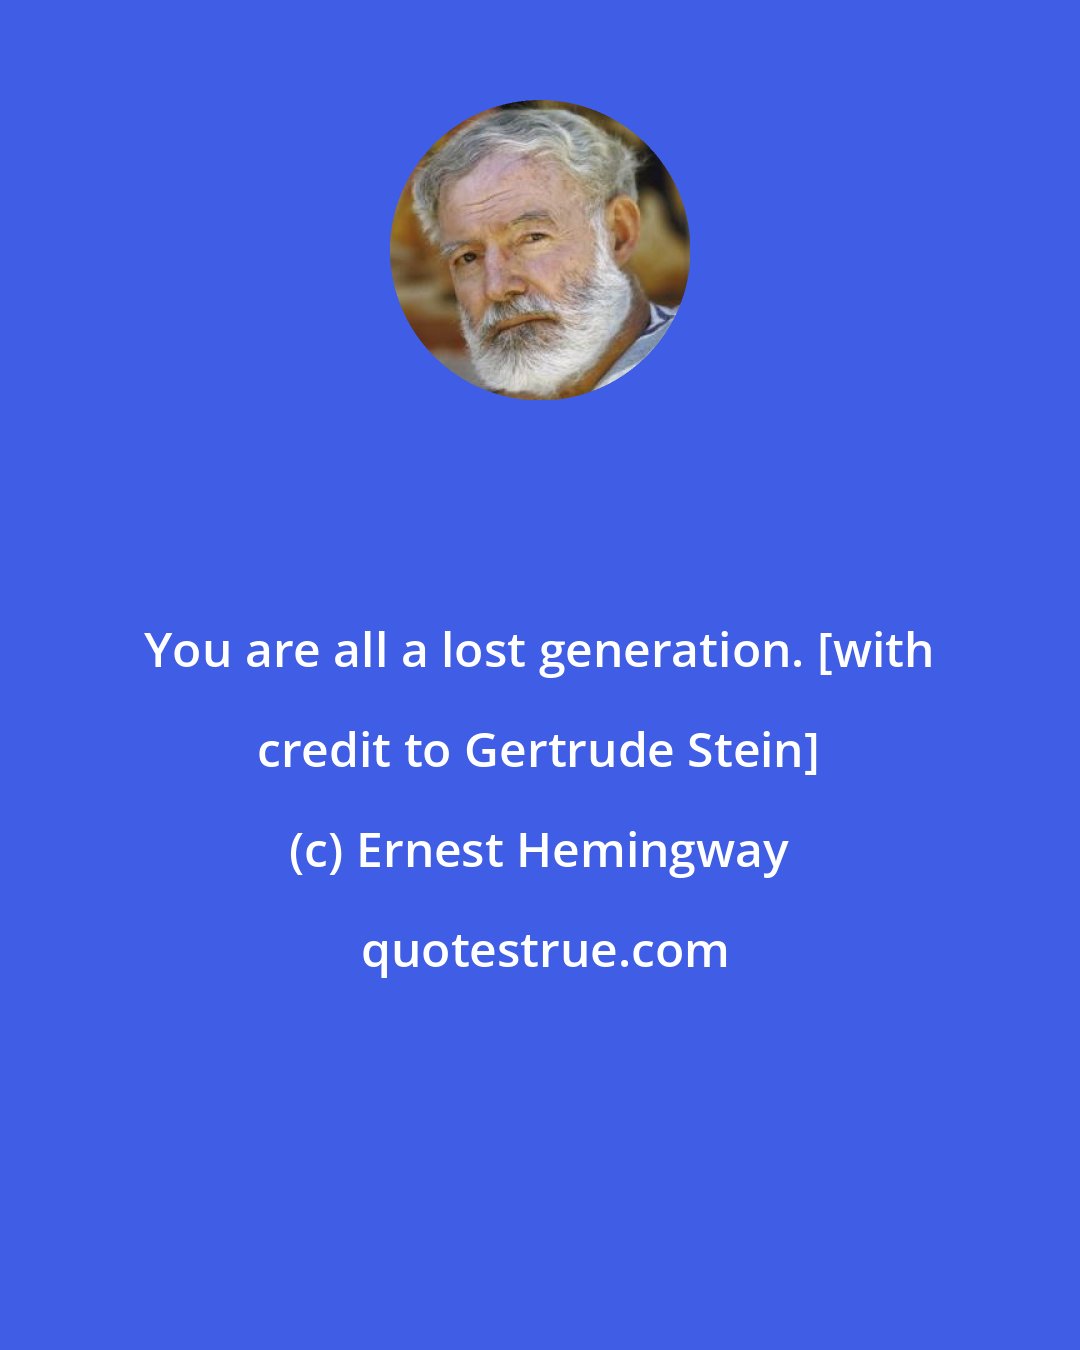 Ernest Hemingway: You are all a lost generation. [with credit to Gertrude Stein]